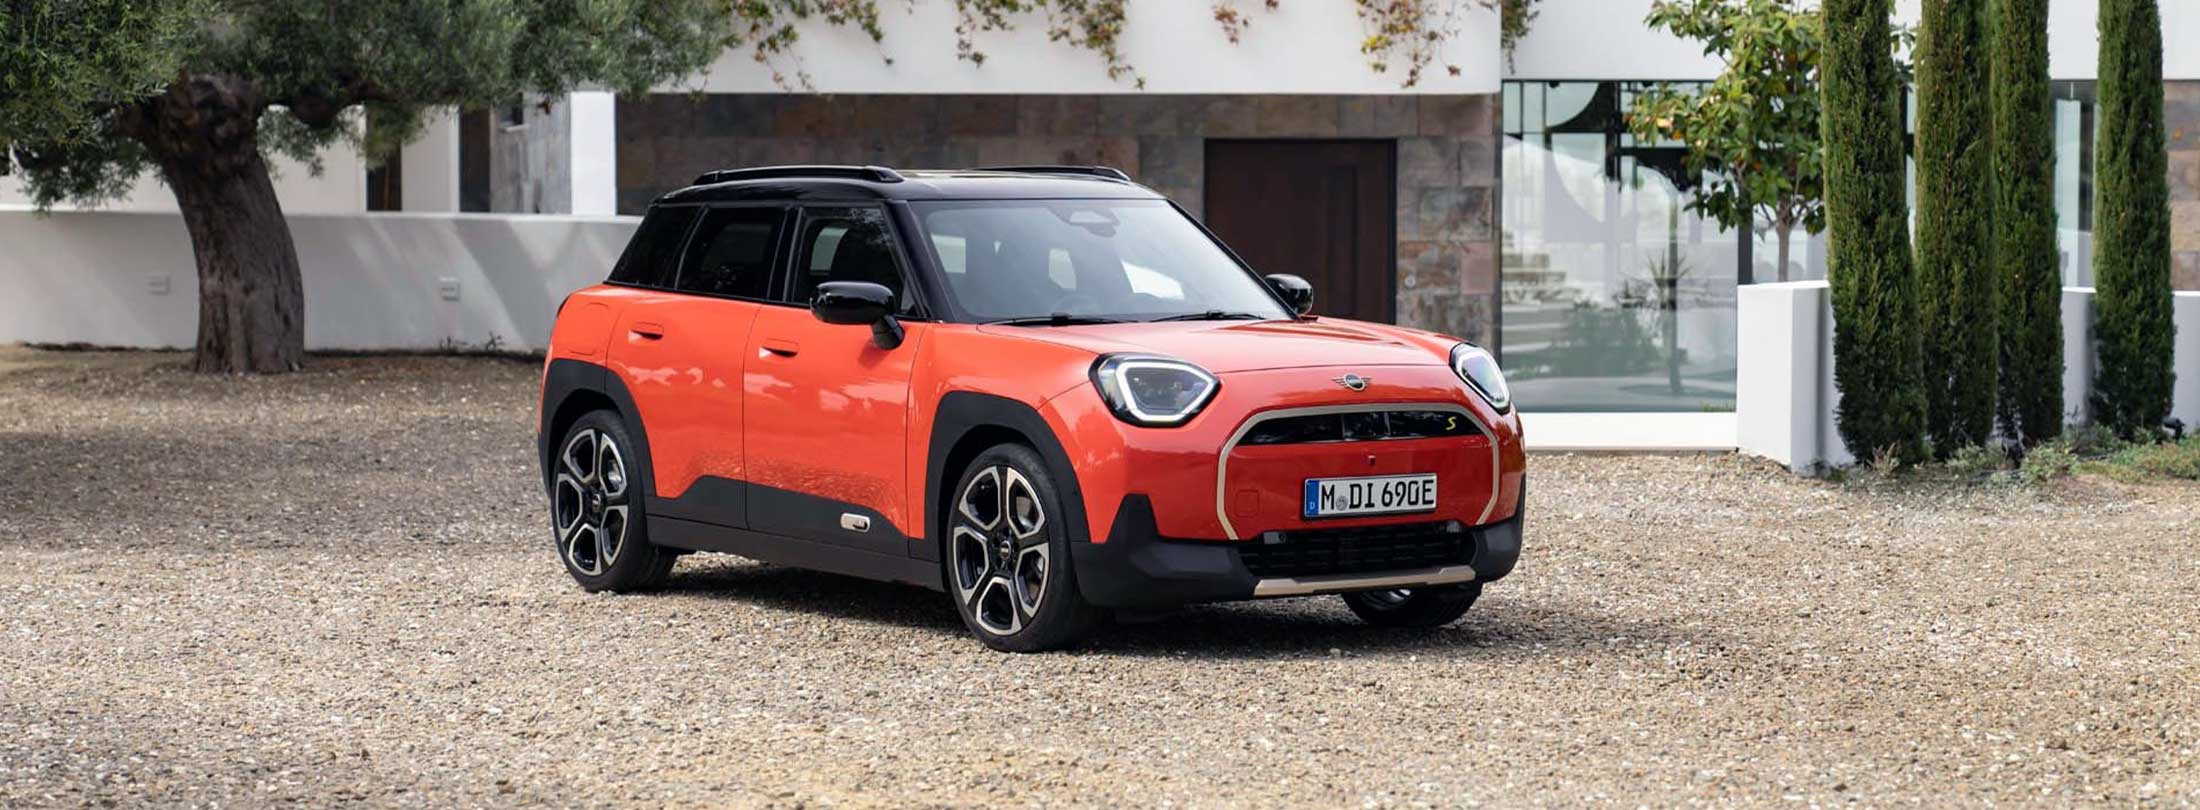 MINI Introduces First-Ever Aceman Model